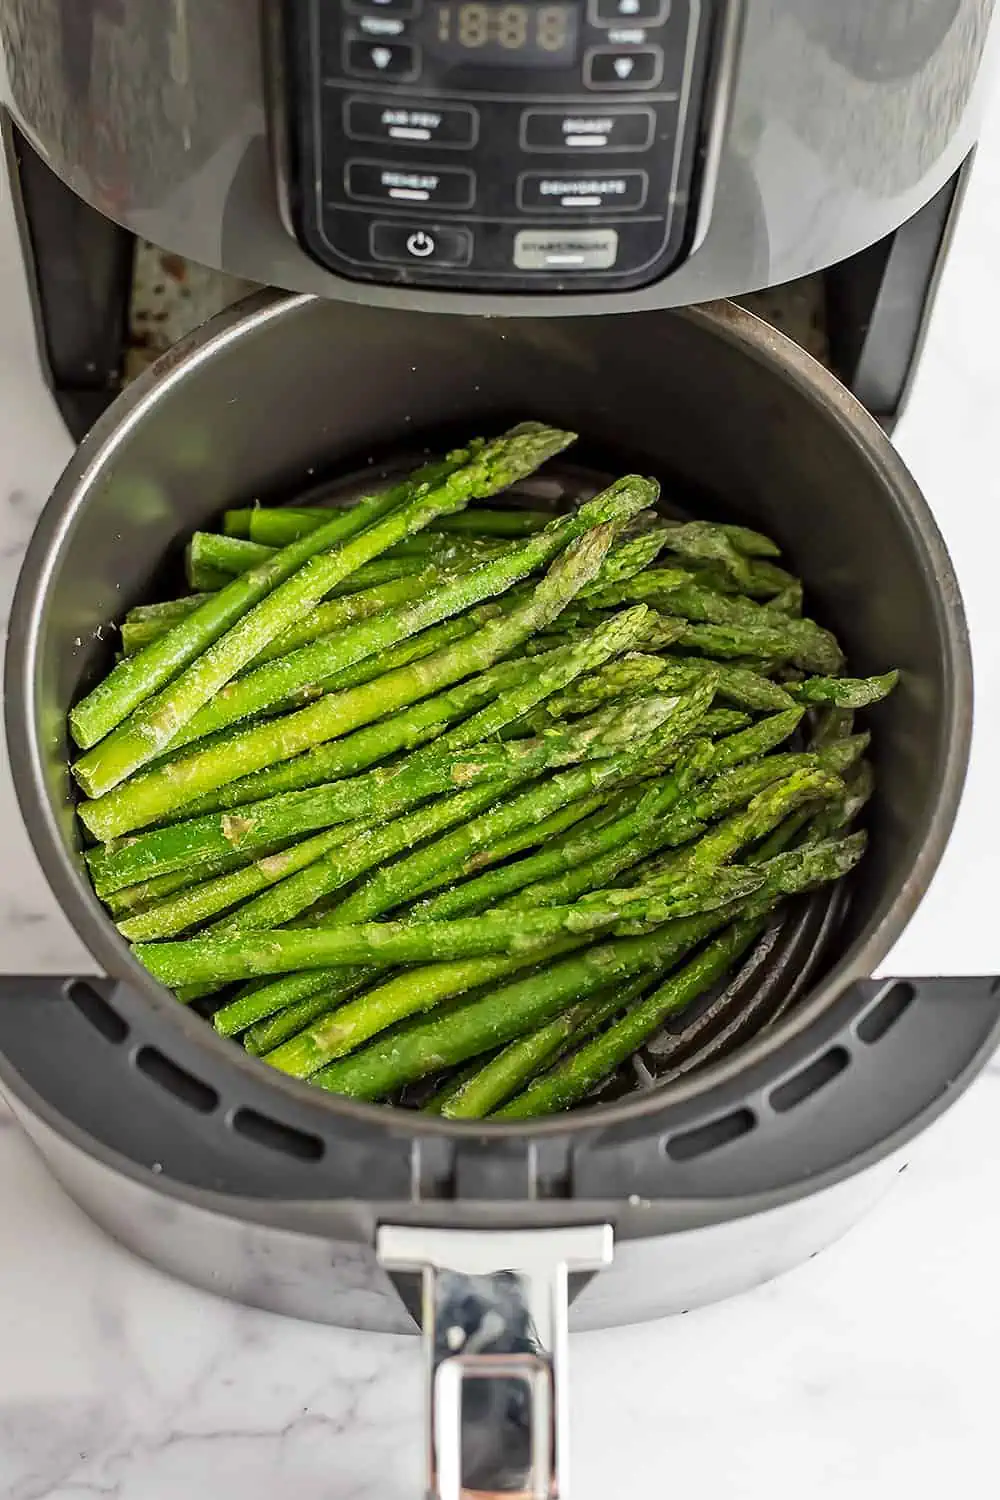 Frozen asparagus in air fryer basket before cooking.